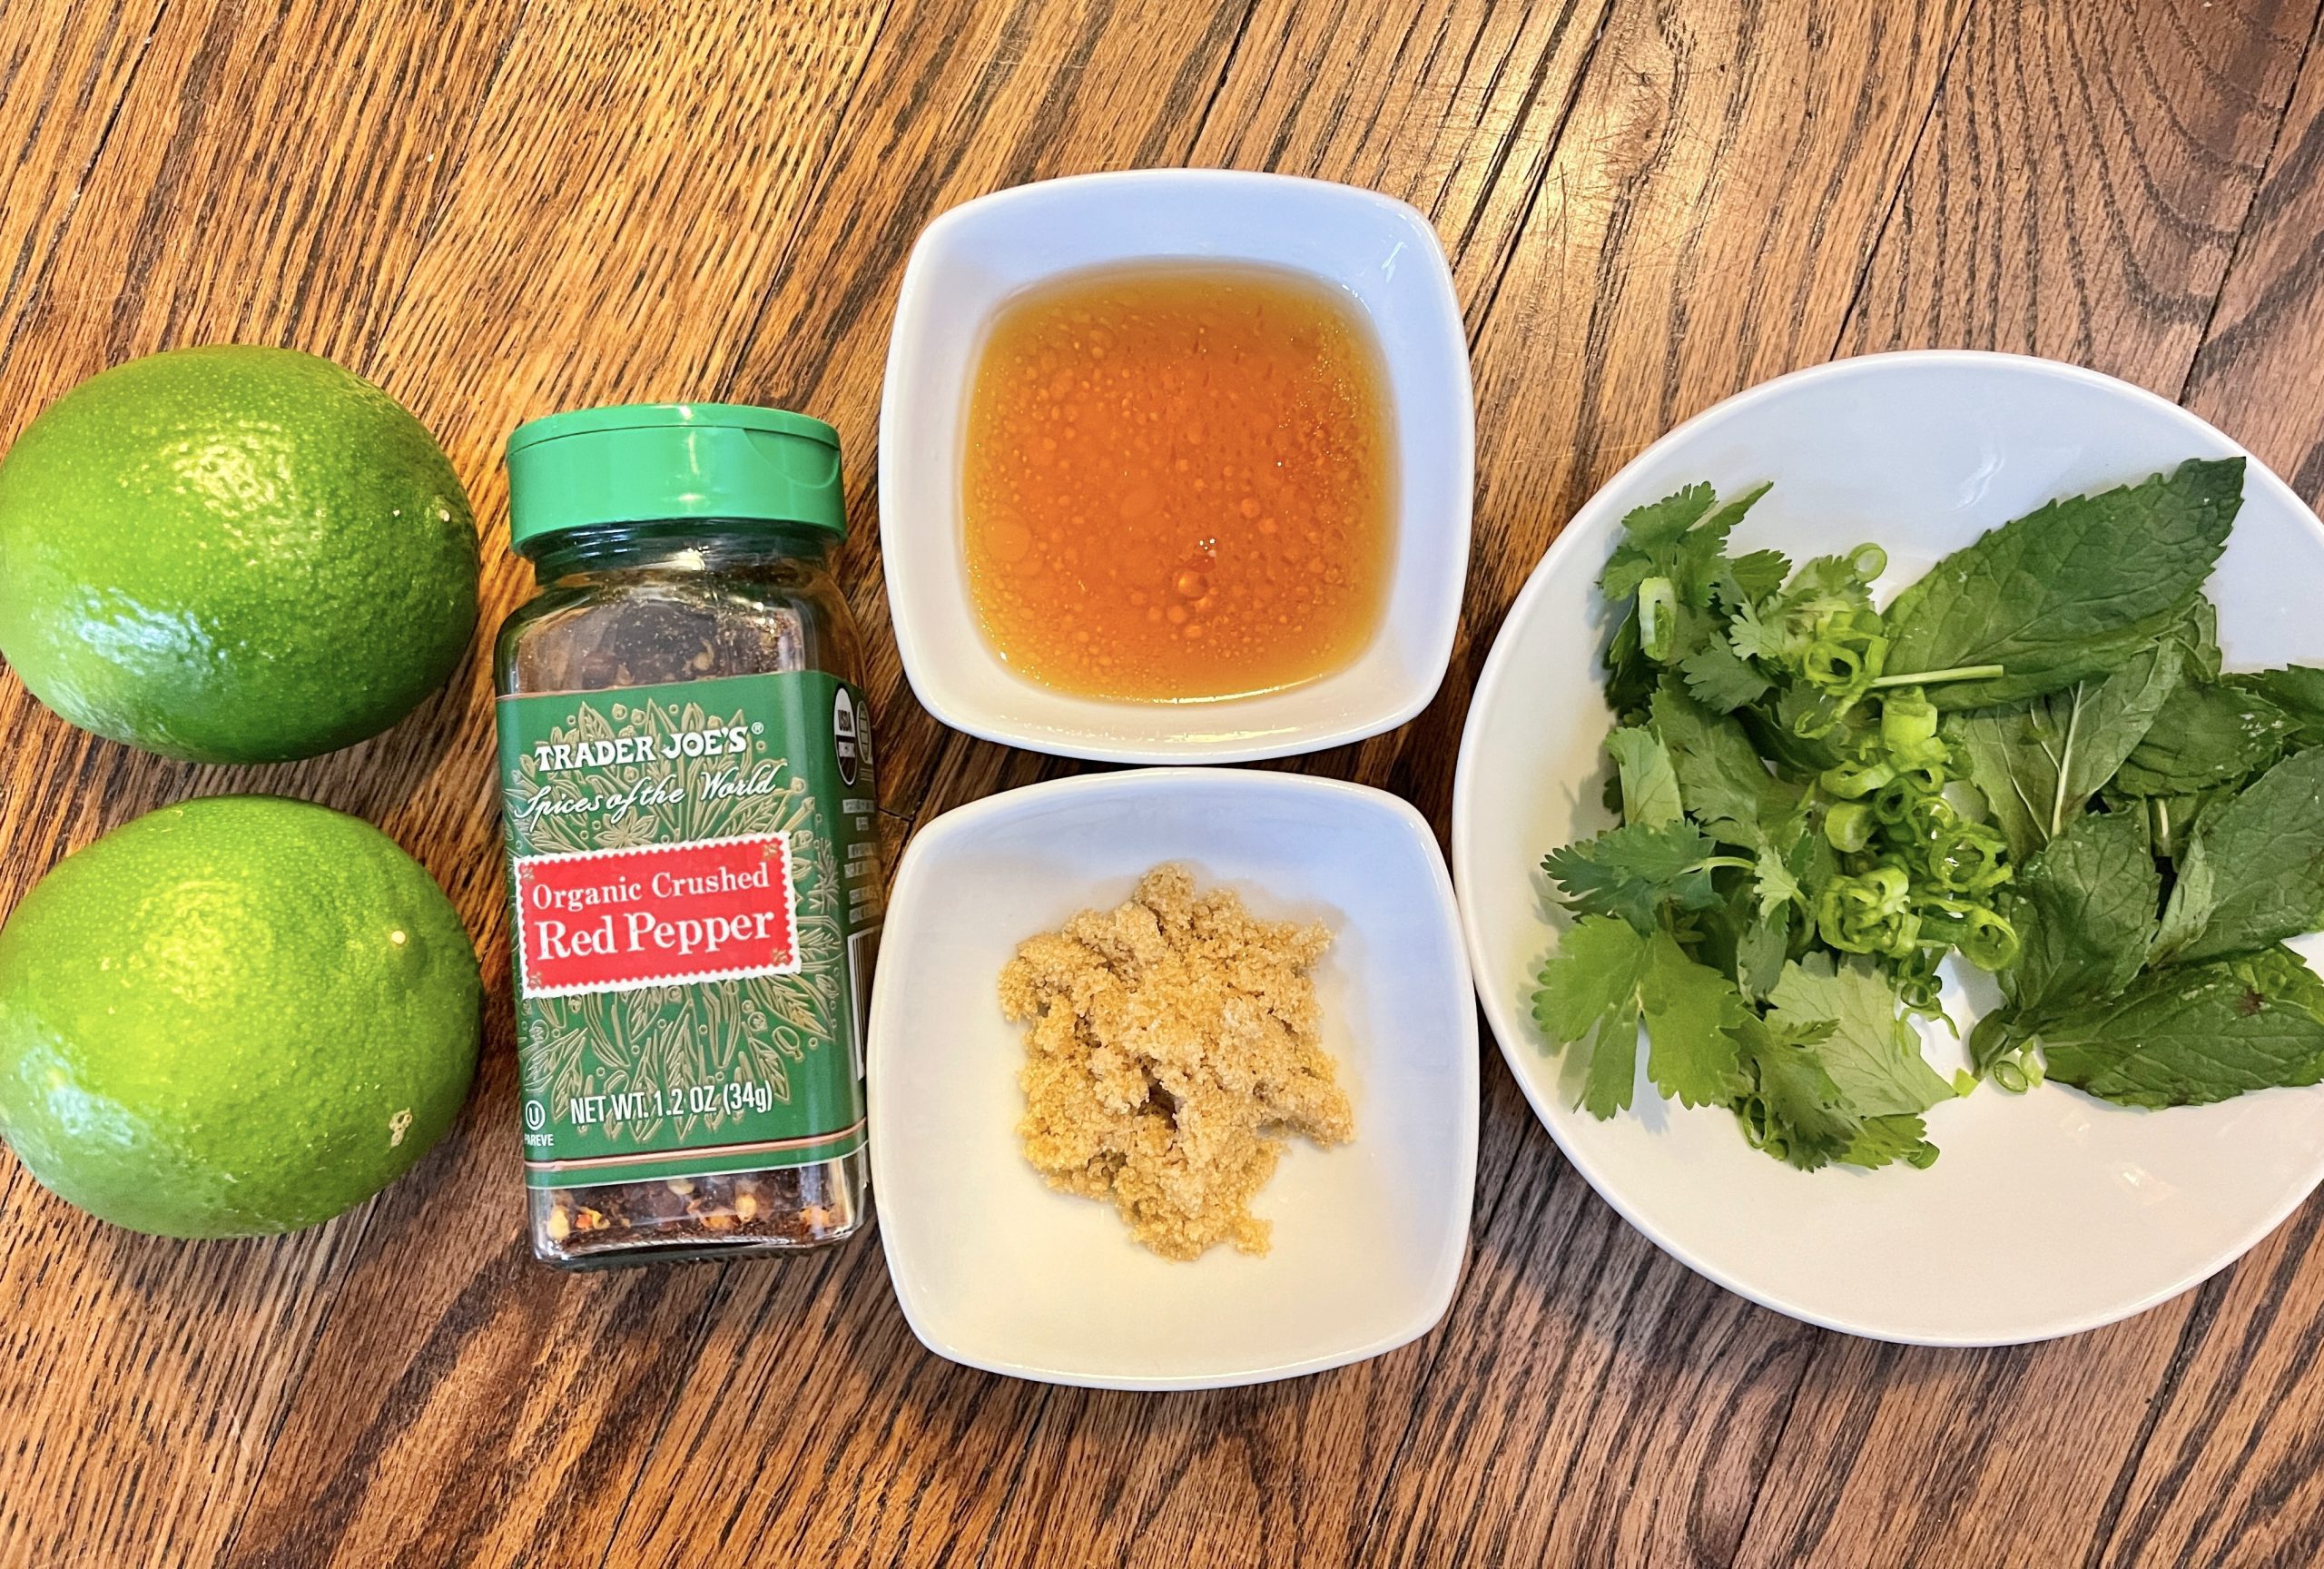 thai-style vinaigrette ingredients - fish sauce, lime juice, scallion, light brown sugar, red pepper flakes, chopped cilantro and mint